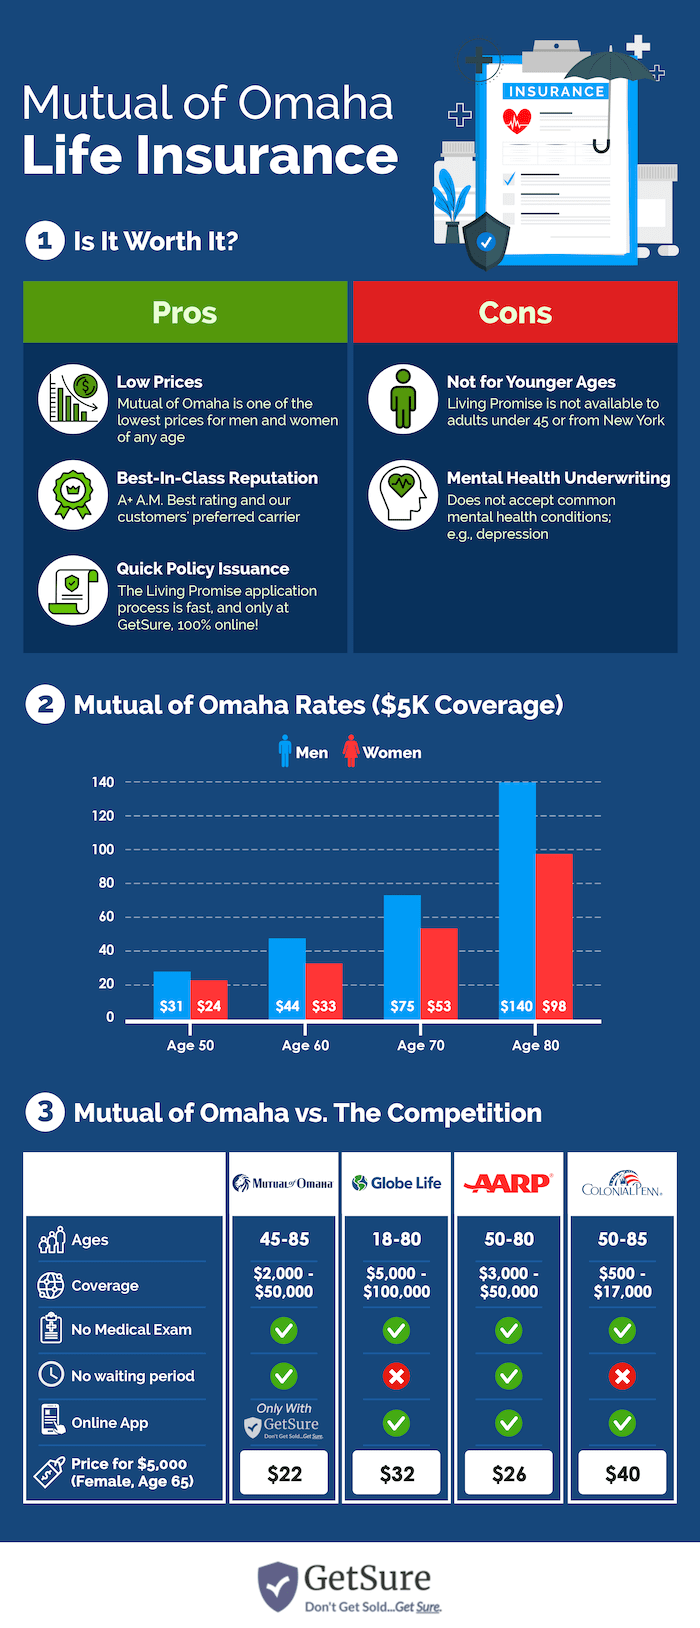 This infographic is split into three sections: (1) the first looks at the pros and cons of Mutual of Omaha's Living Promise final expense life insurance, (2) the second shows how much men and women would pay for $5K of coverage, and (3) the third shows a comparison of Mutual of Omaha's Plan to other well-known life insurance options for seniors